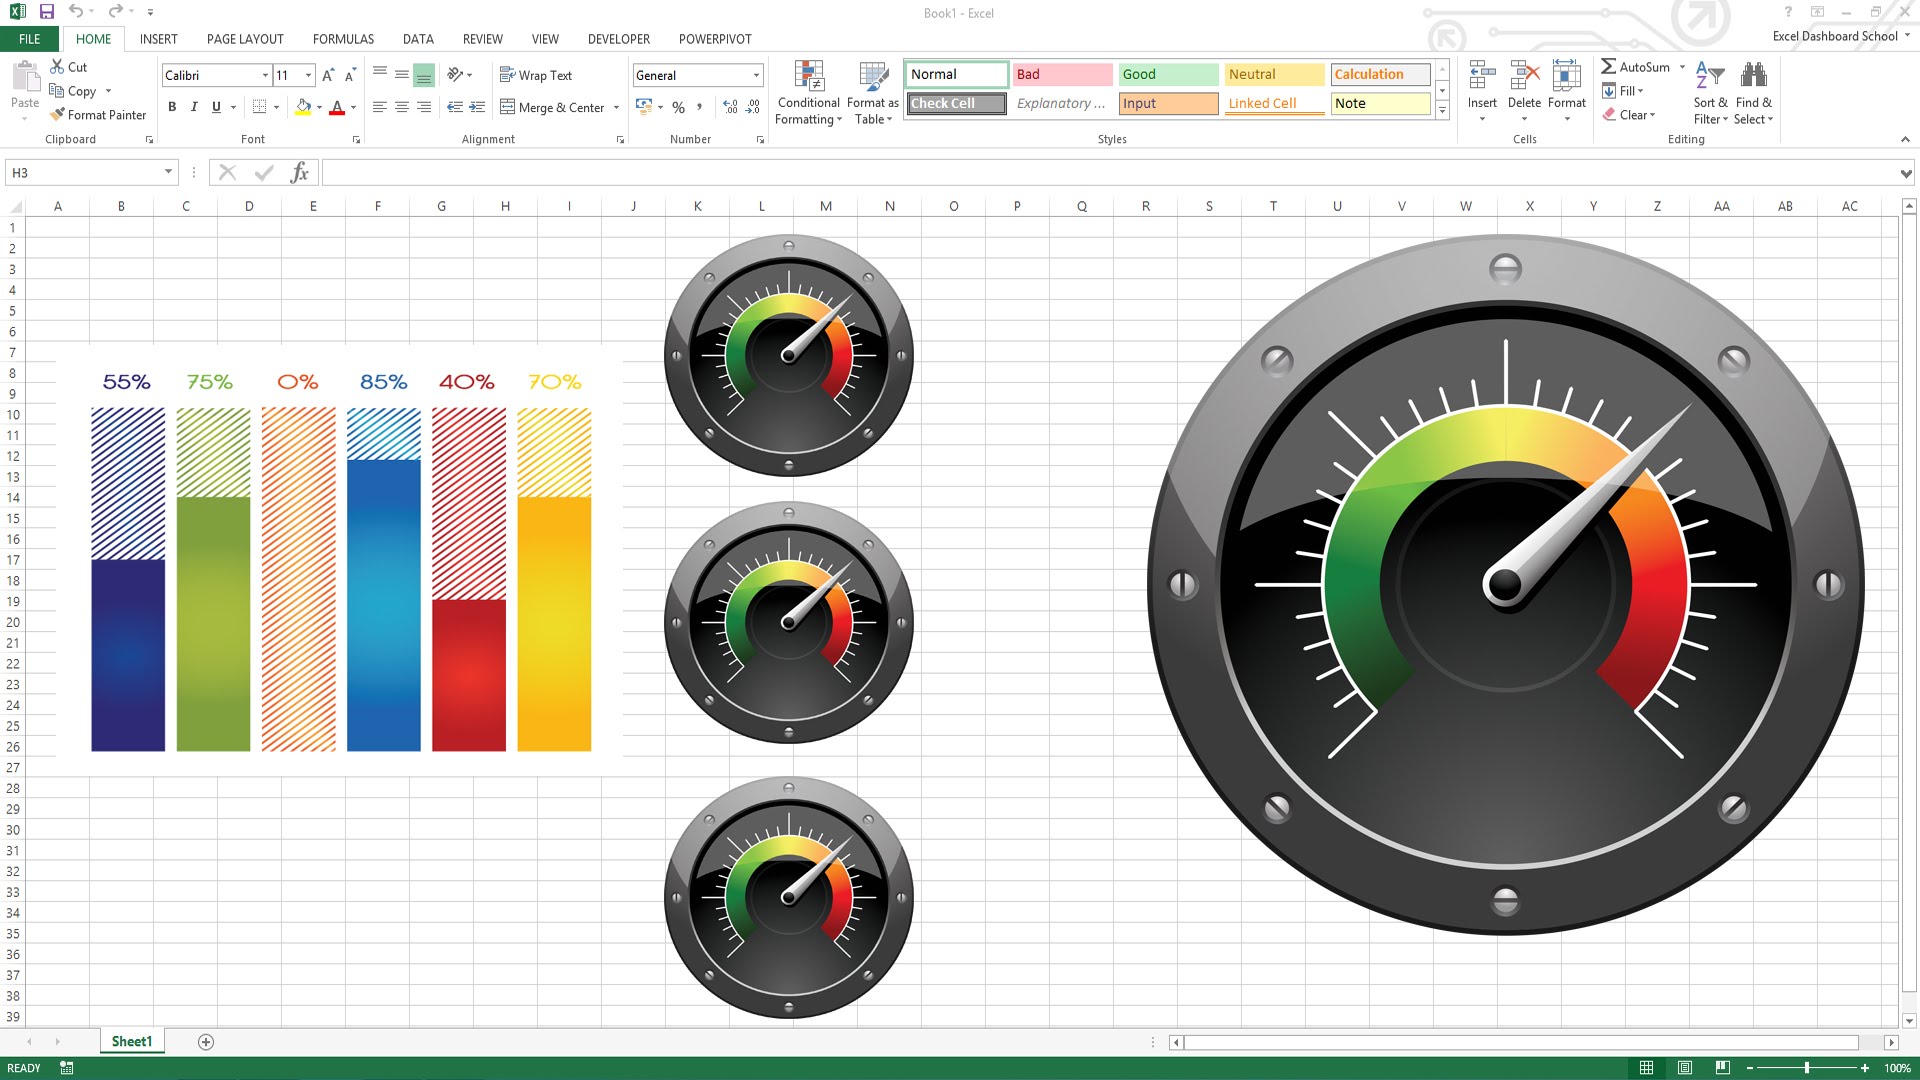 Creating KPI Dashboard with gauges - Excel Dashboard Templates - YouTube